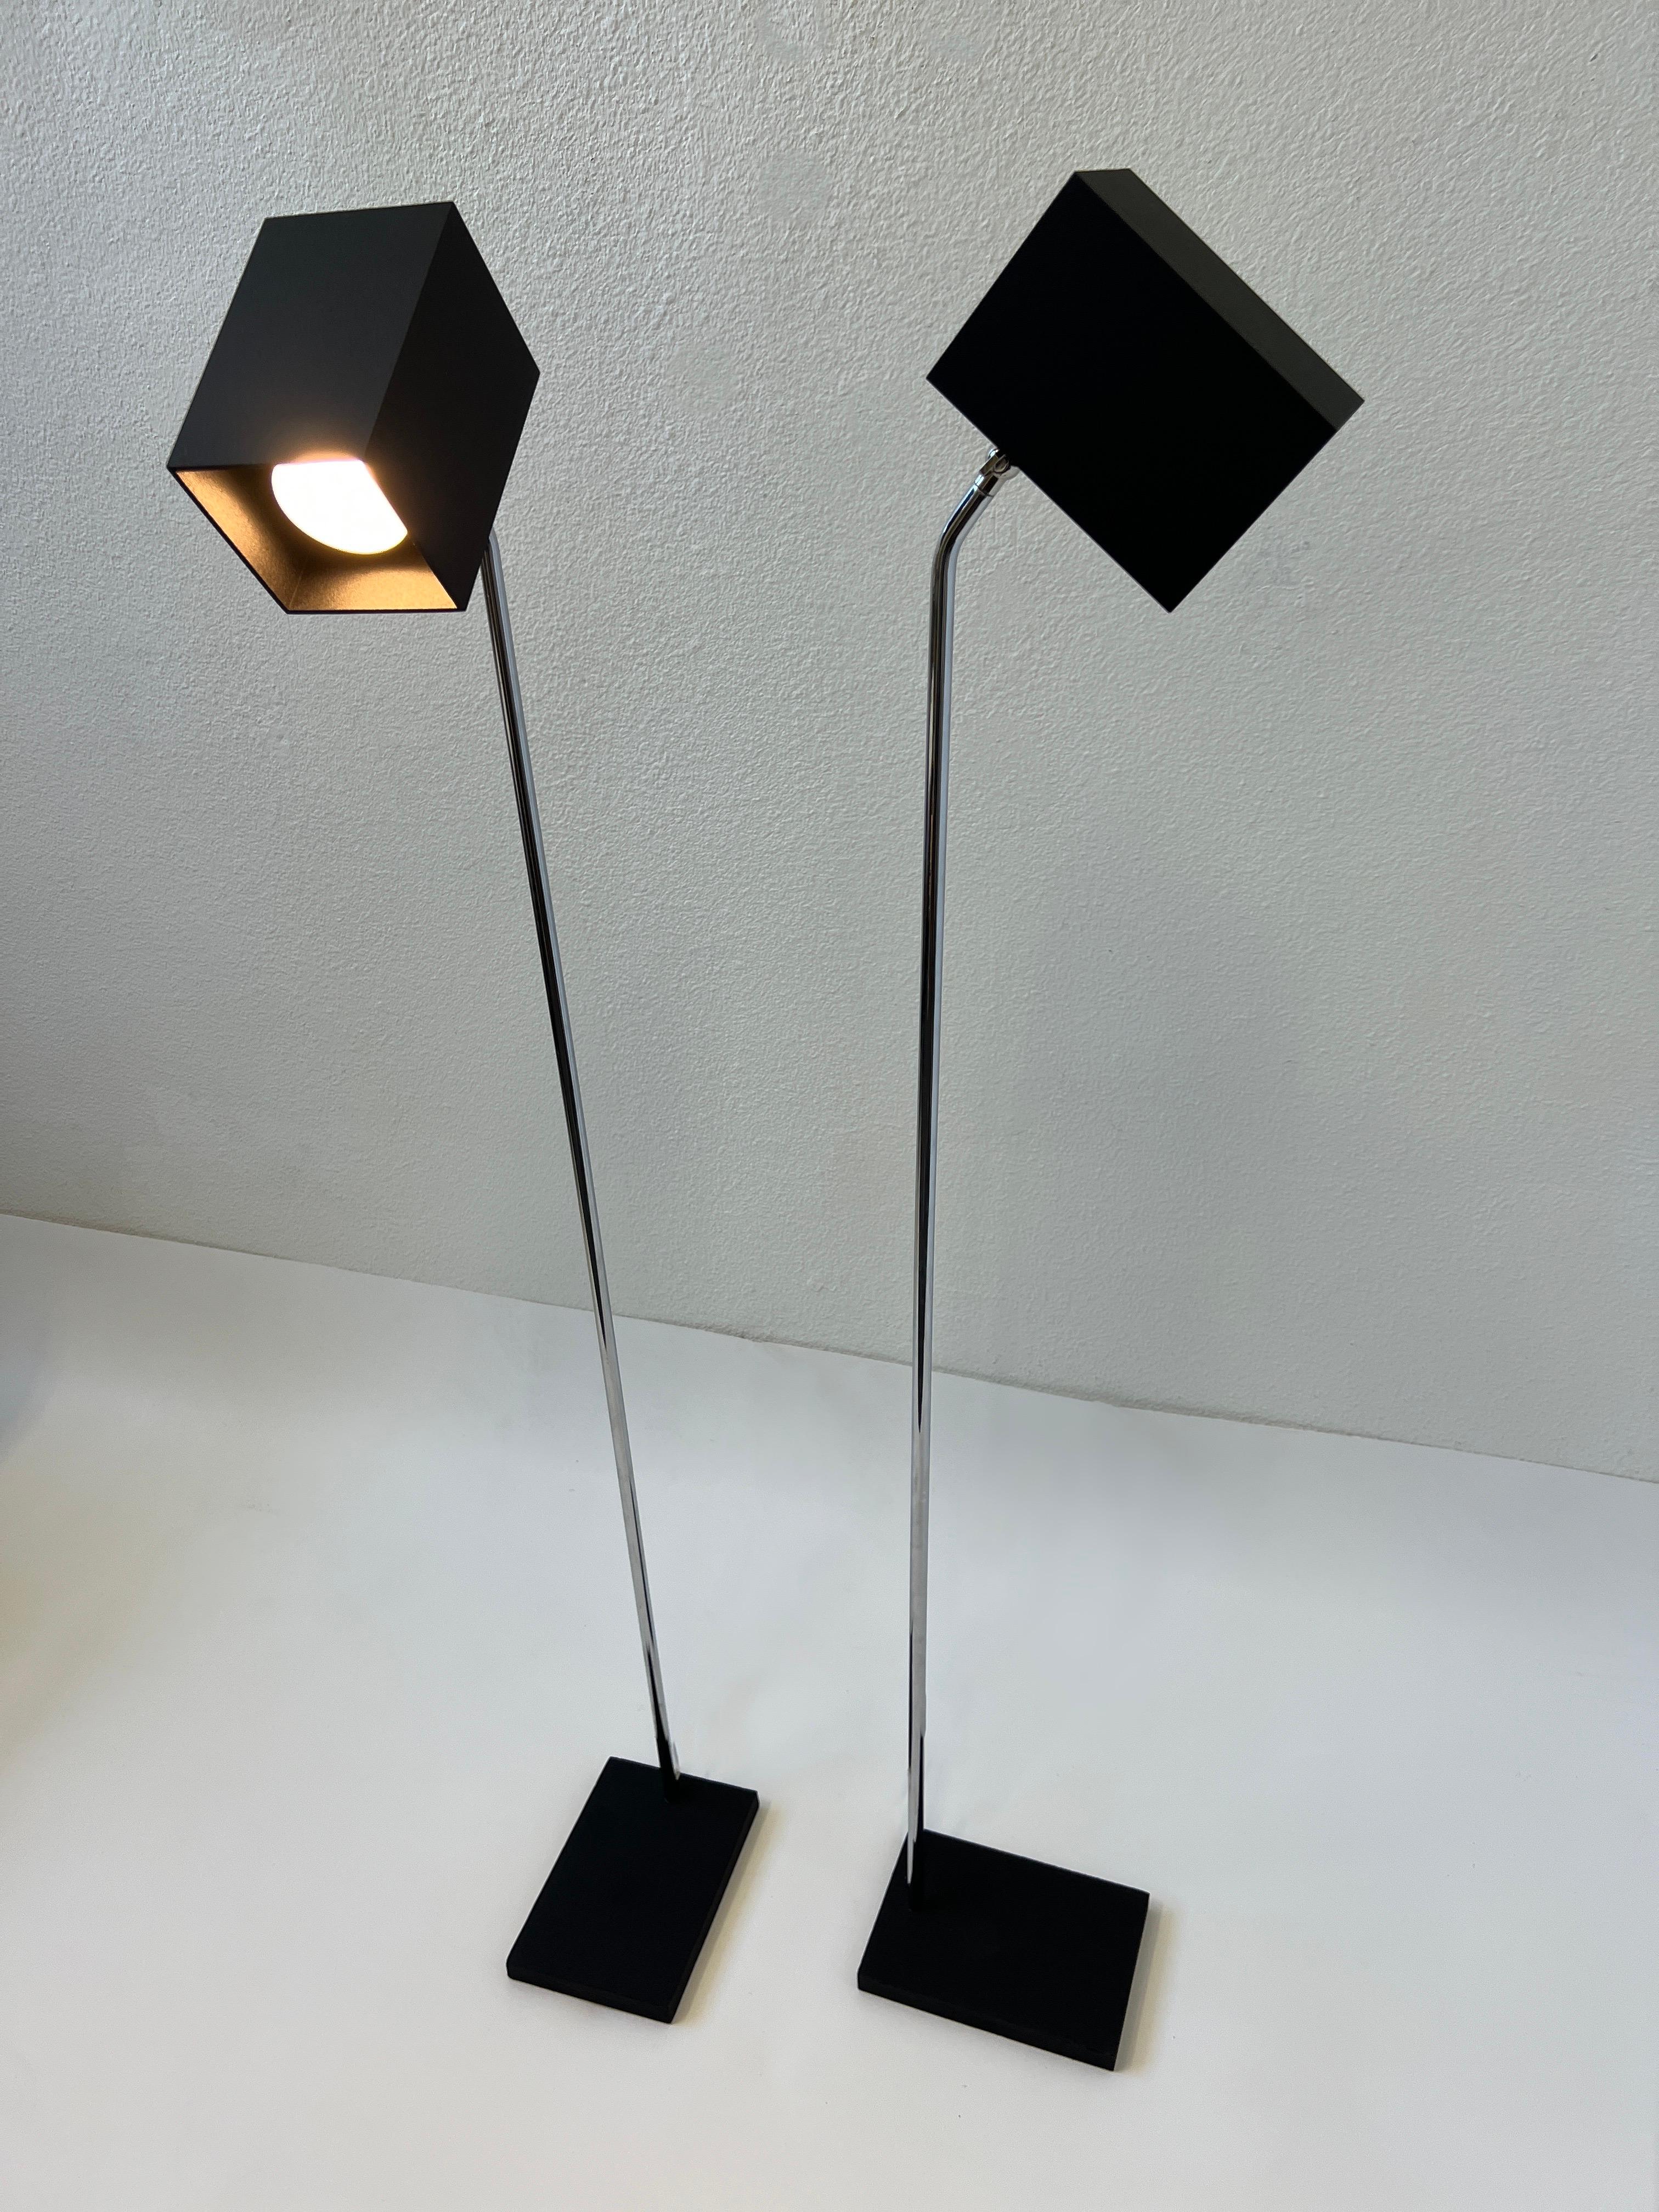 American Pair of Black and Chrome Floor Lamps by Kovacs